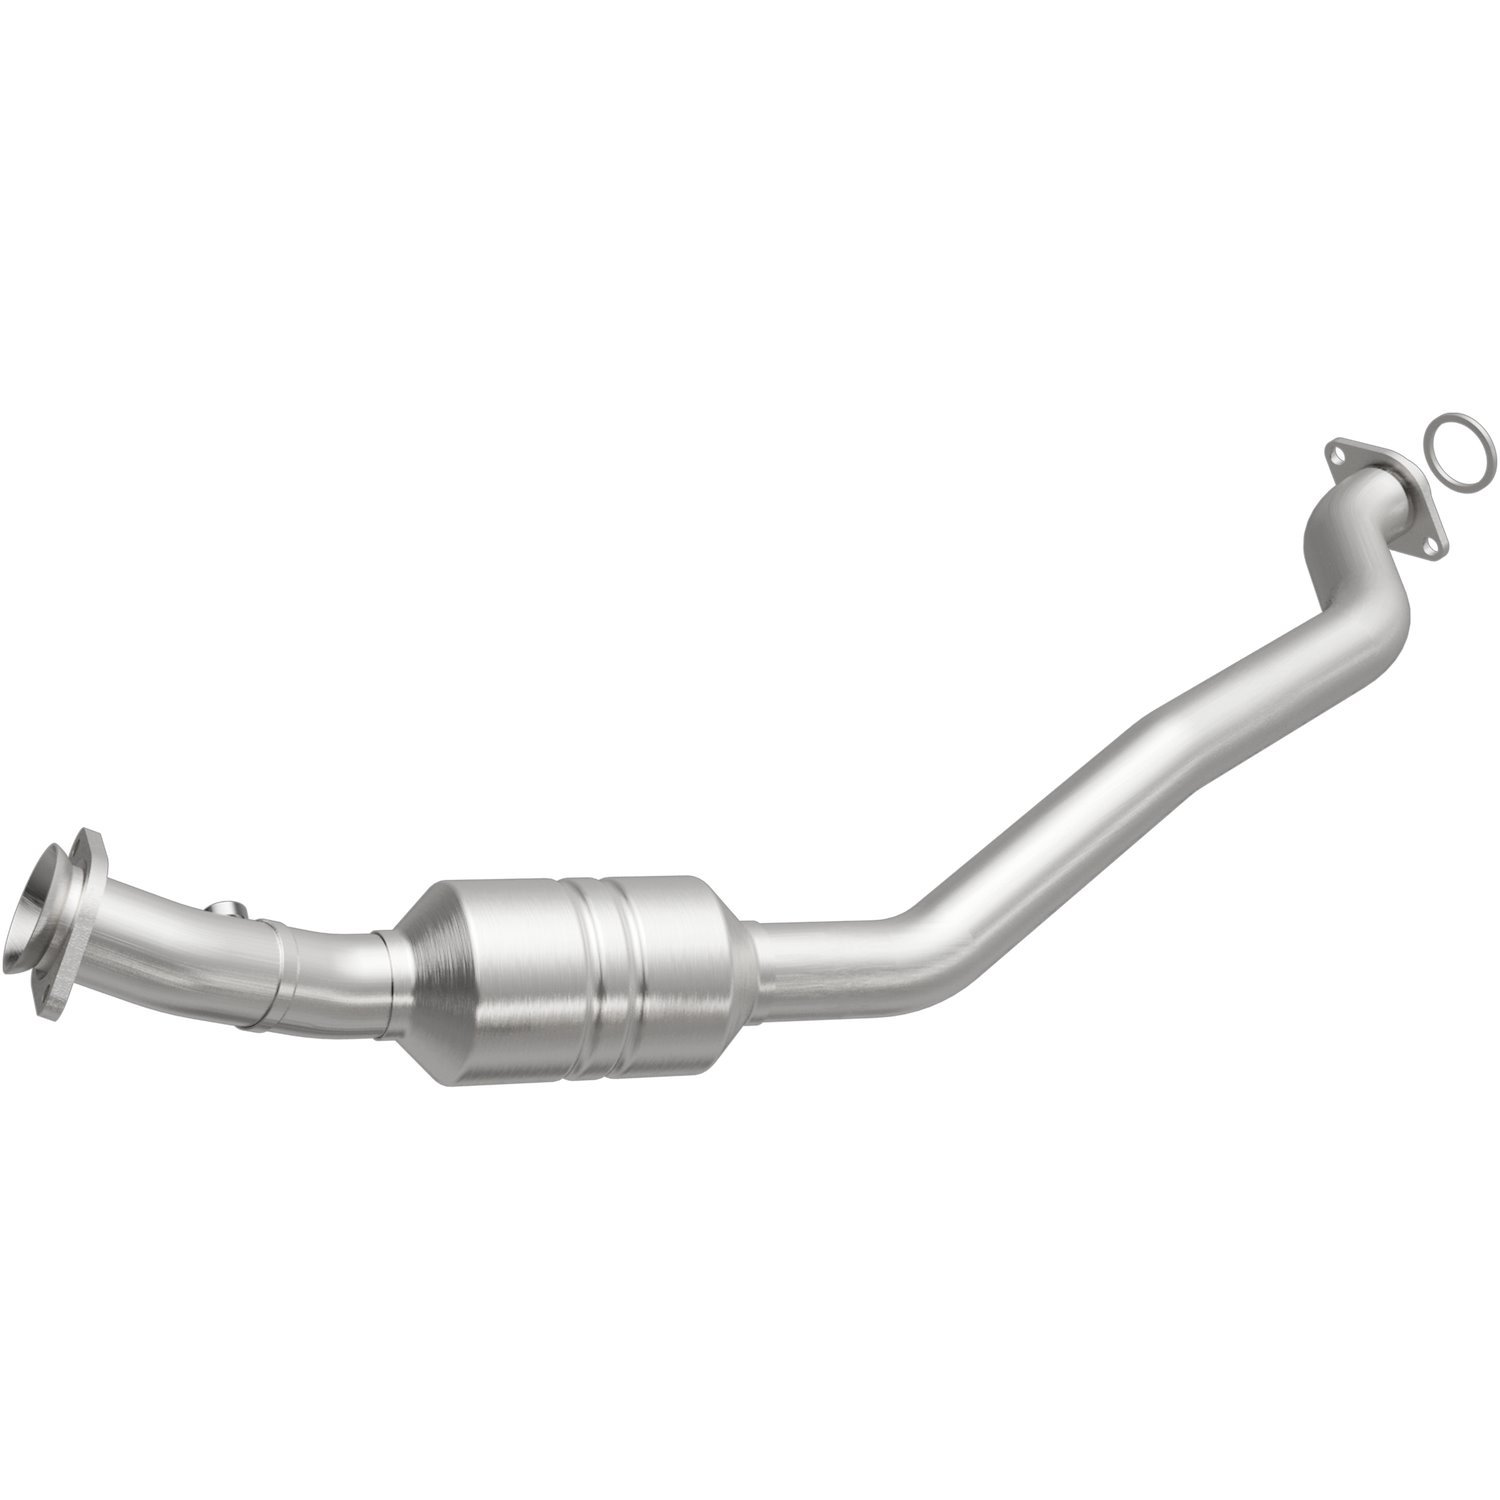 OEM Grade Federal / EPA Compliant Direct-Fit Catalytic Converter 49879